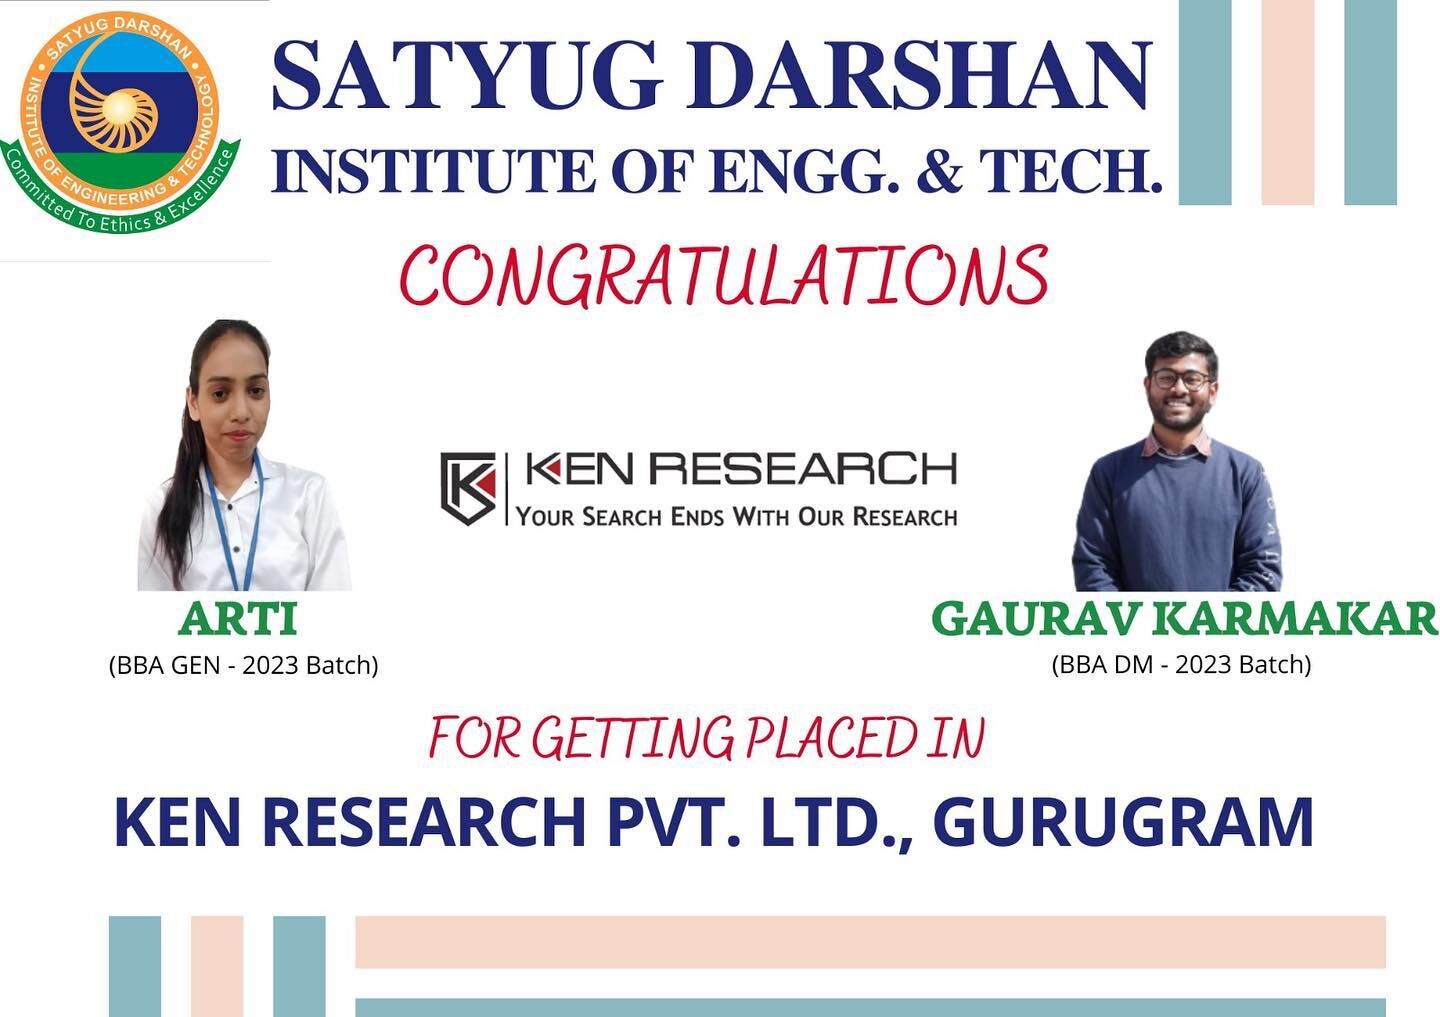 T&amp;P Cell SDIET along with Ken Research Pvt. Ltd., Gurugram successfully conducted a CAMPUS PLACEMENT DRIVE on April 26, 2023 for BBA final year students where our 2 students got successfully placed with below detail- 
1. Arti
2. Gaurav Karmakar

